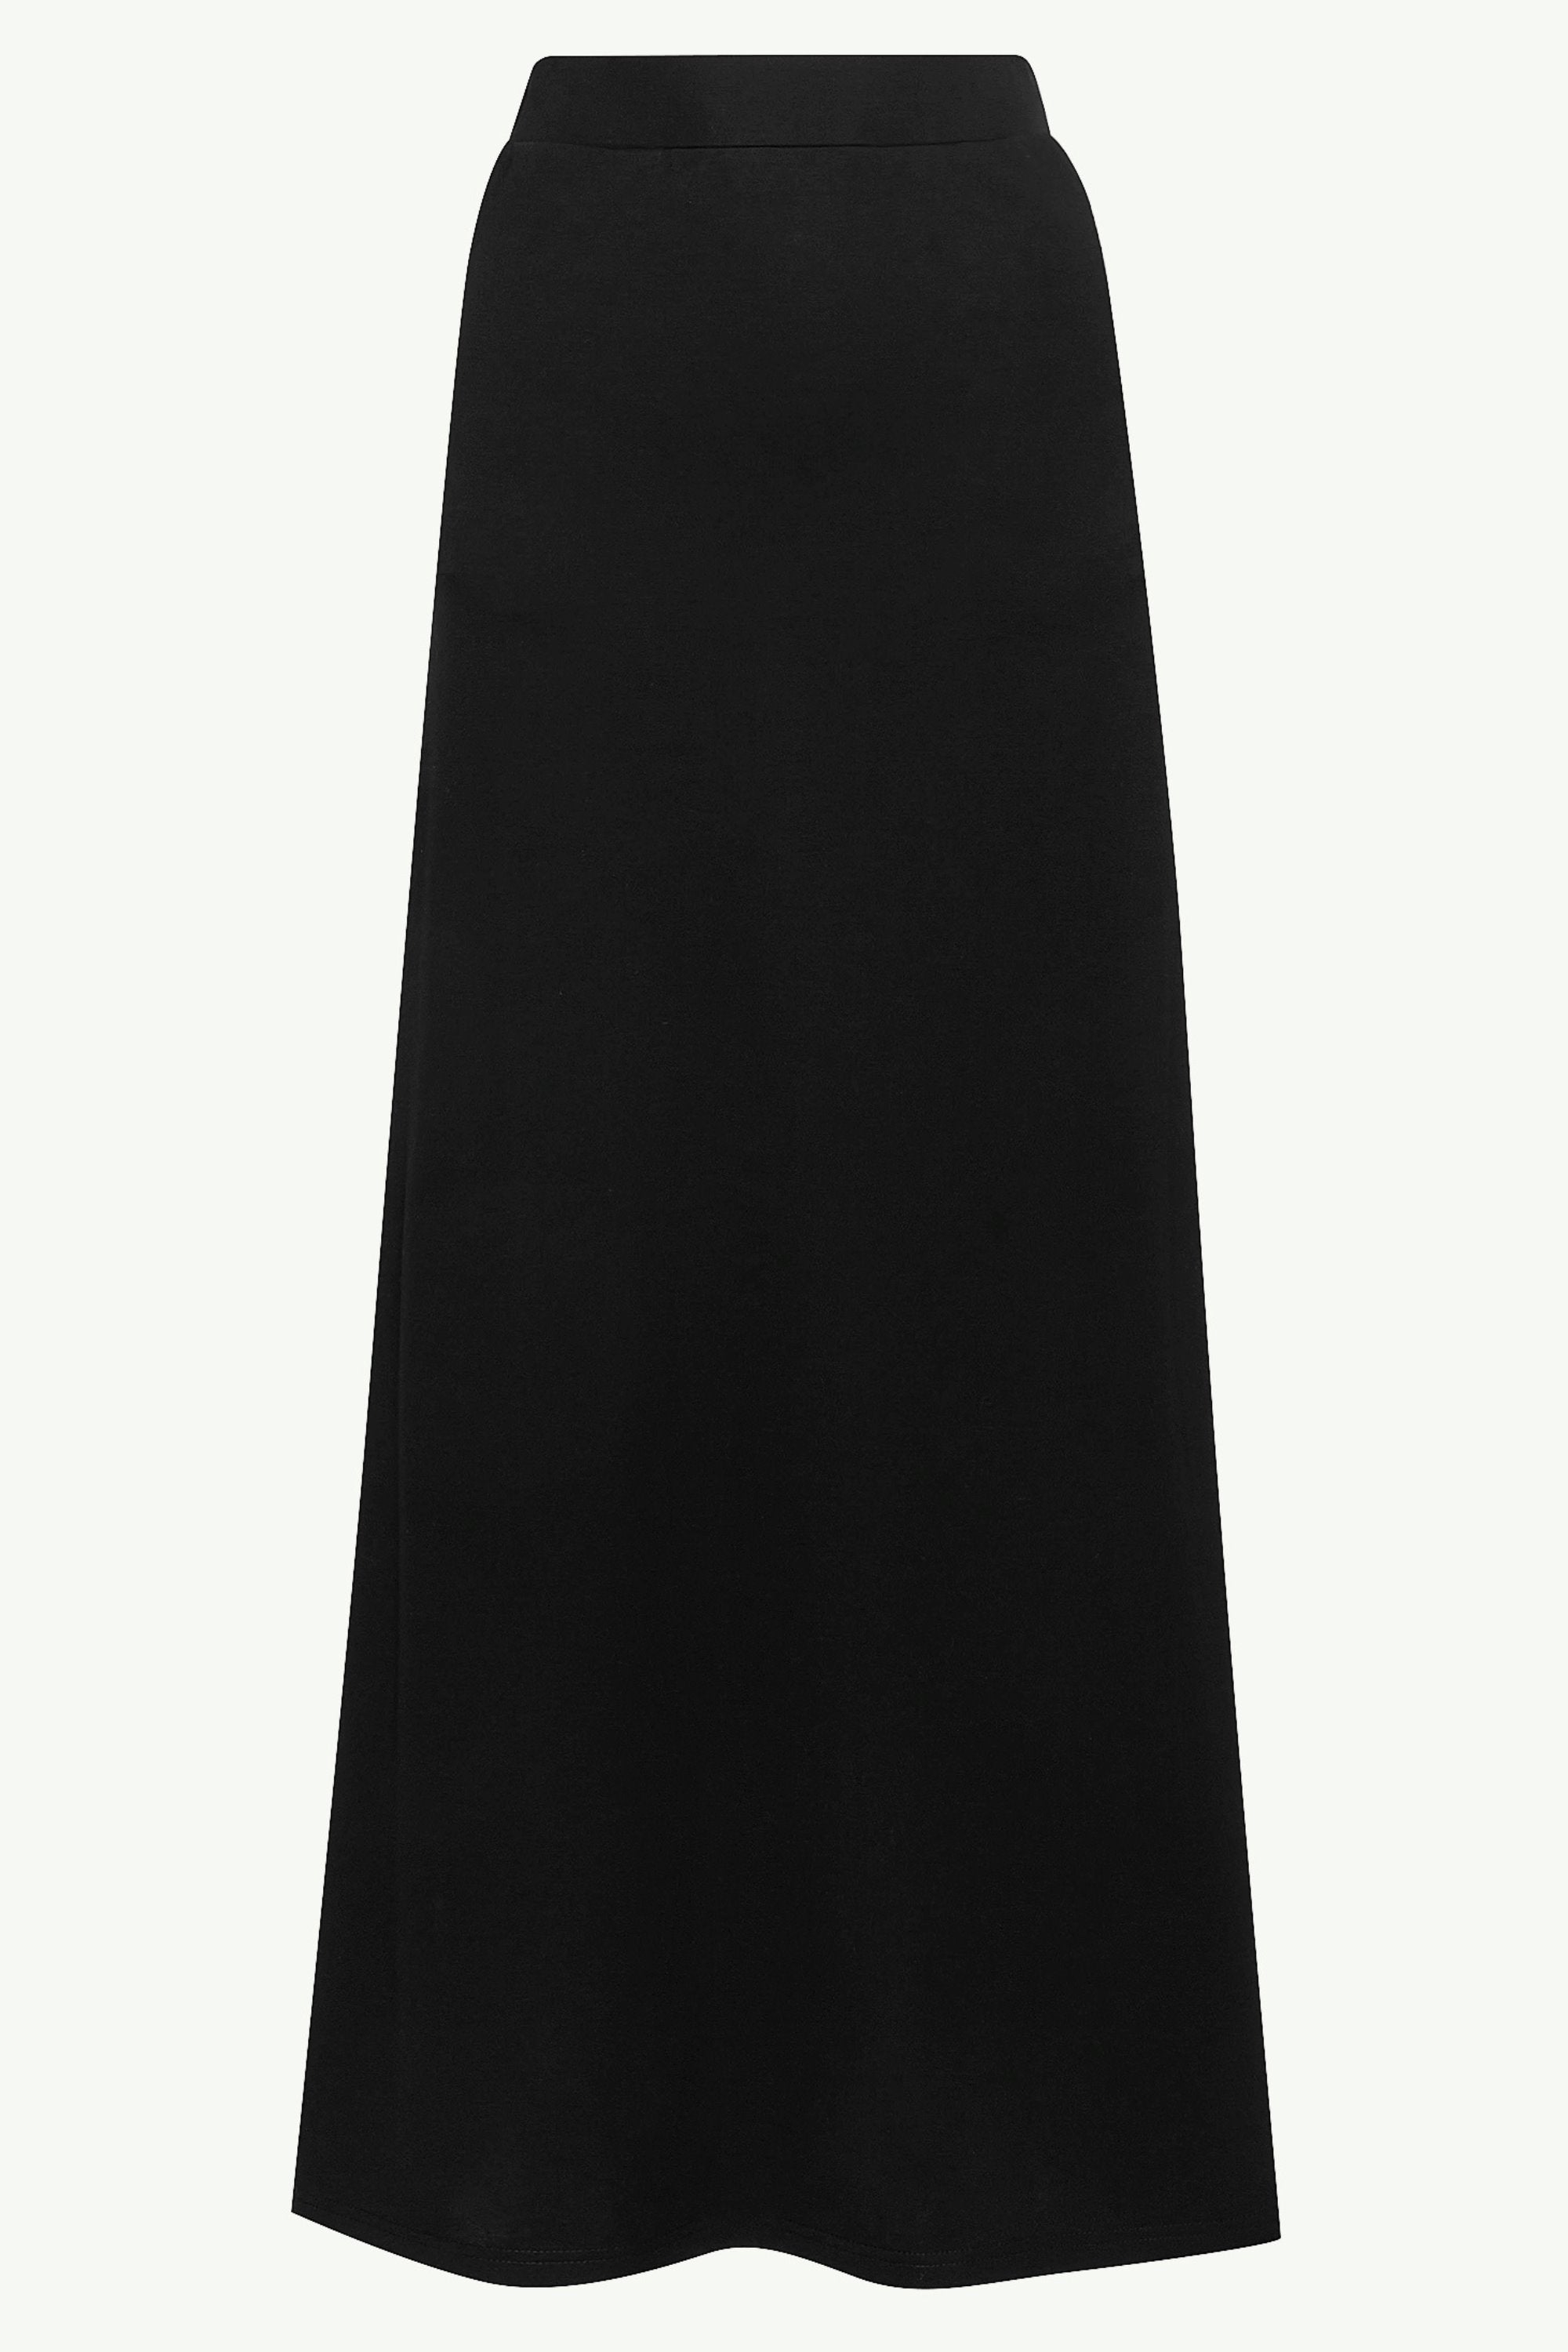 Essential Jersey Maxi Skirt - Black Clothing epschoolboard 